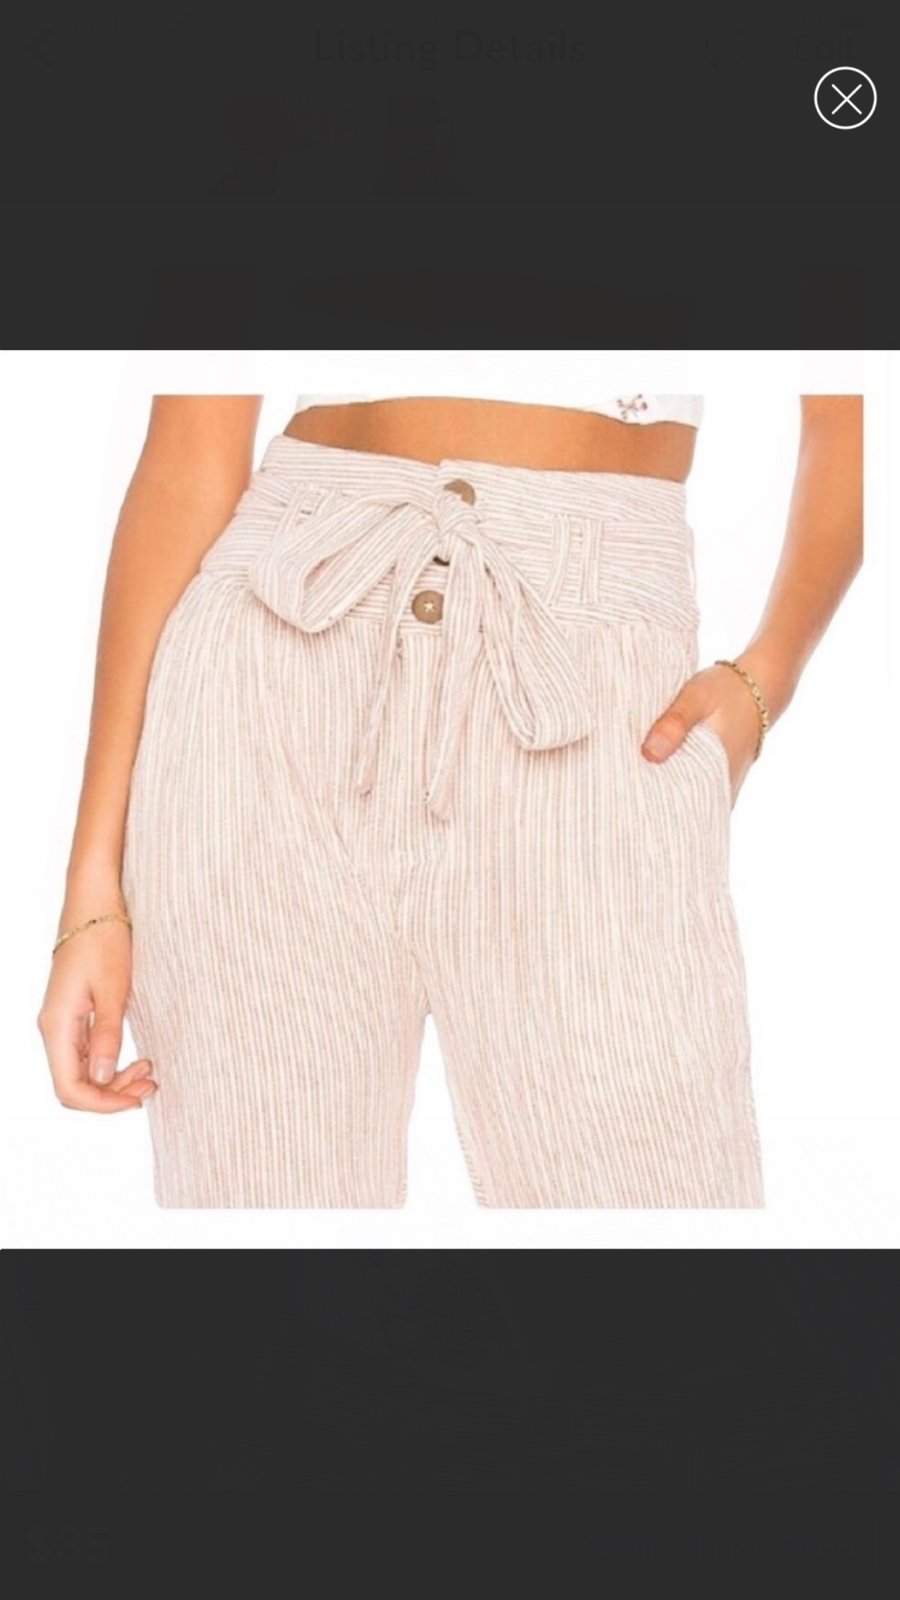 Fashion Free People Rumors Yarn dyed harem striped high waist toe belted pants size 0 gYJbseLgw Hot Sale